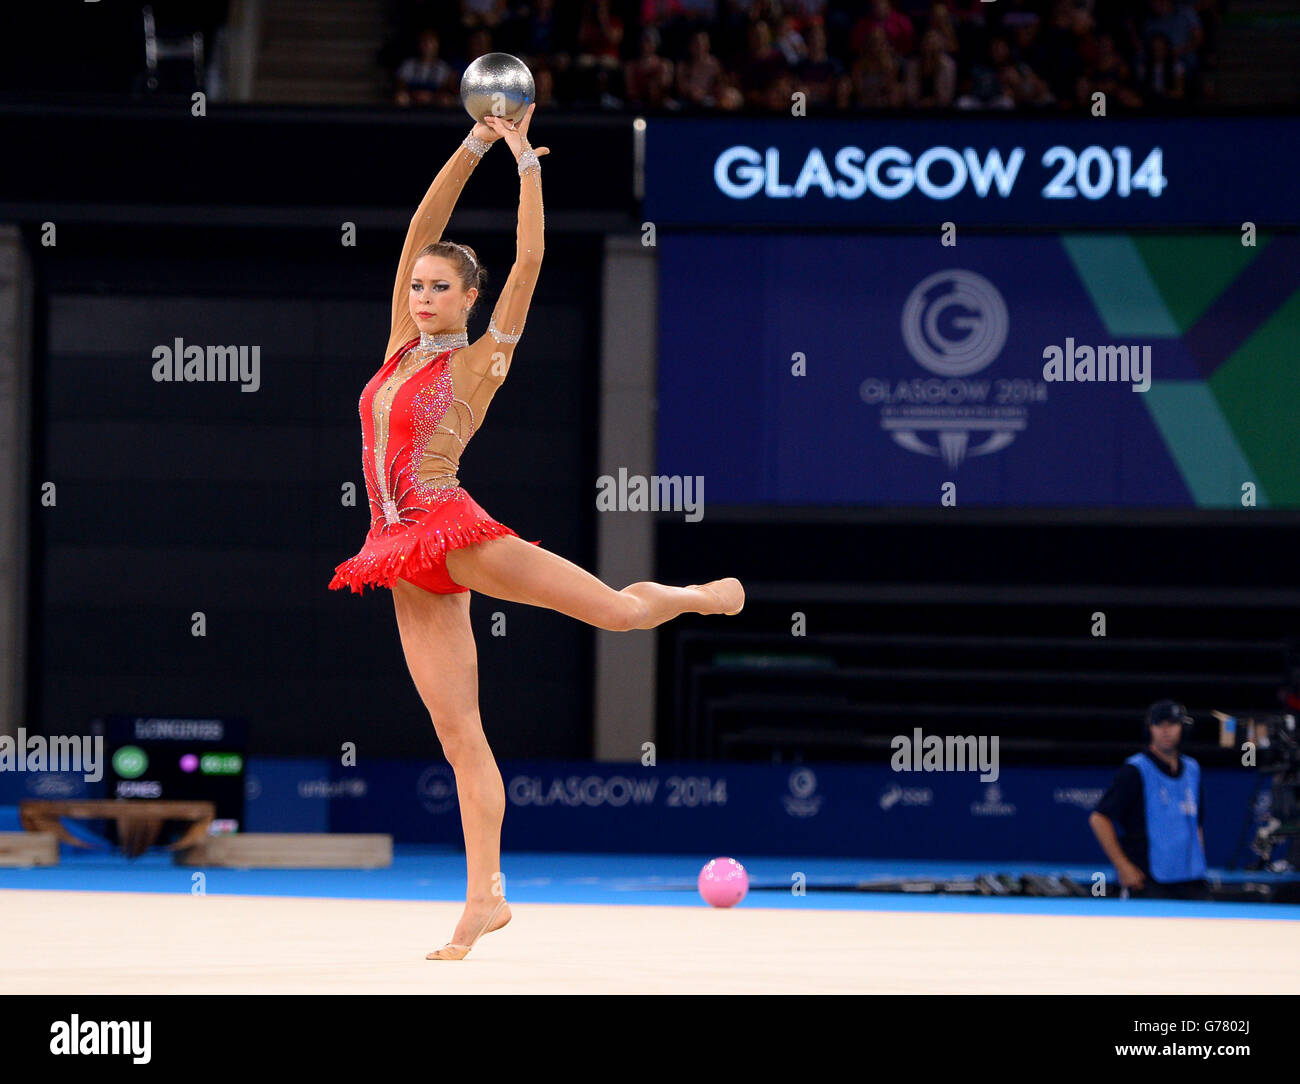 Wales' Francesca Jones competes in the Rhythmic Gymnastics Individual Ball Final at the SSE Hydro during the 2014 Commonwealth Games in Glasgow. Stock Photo